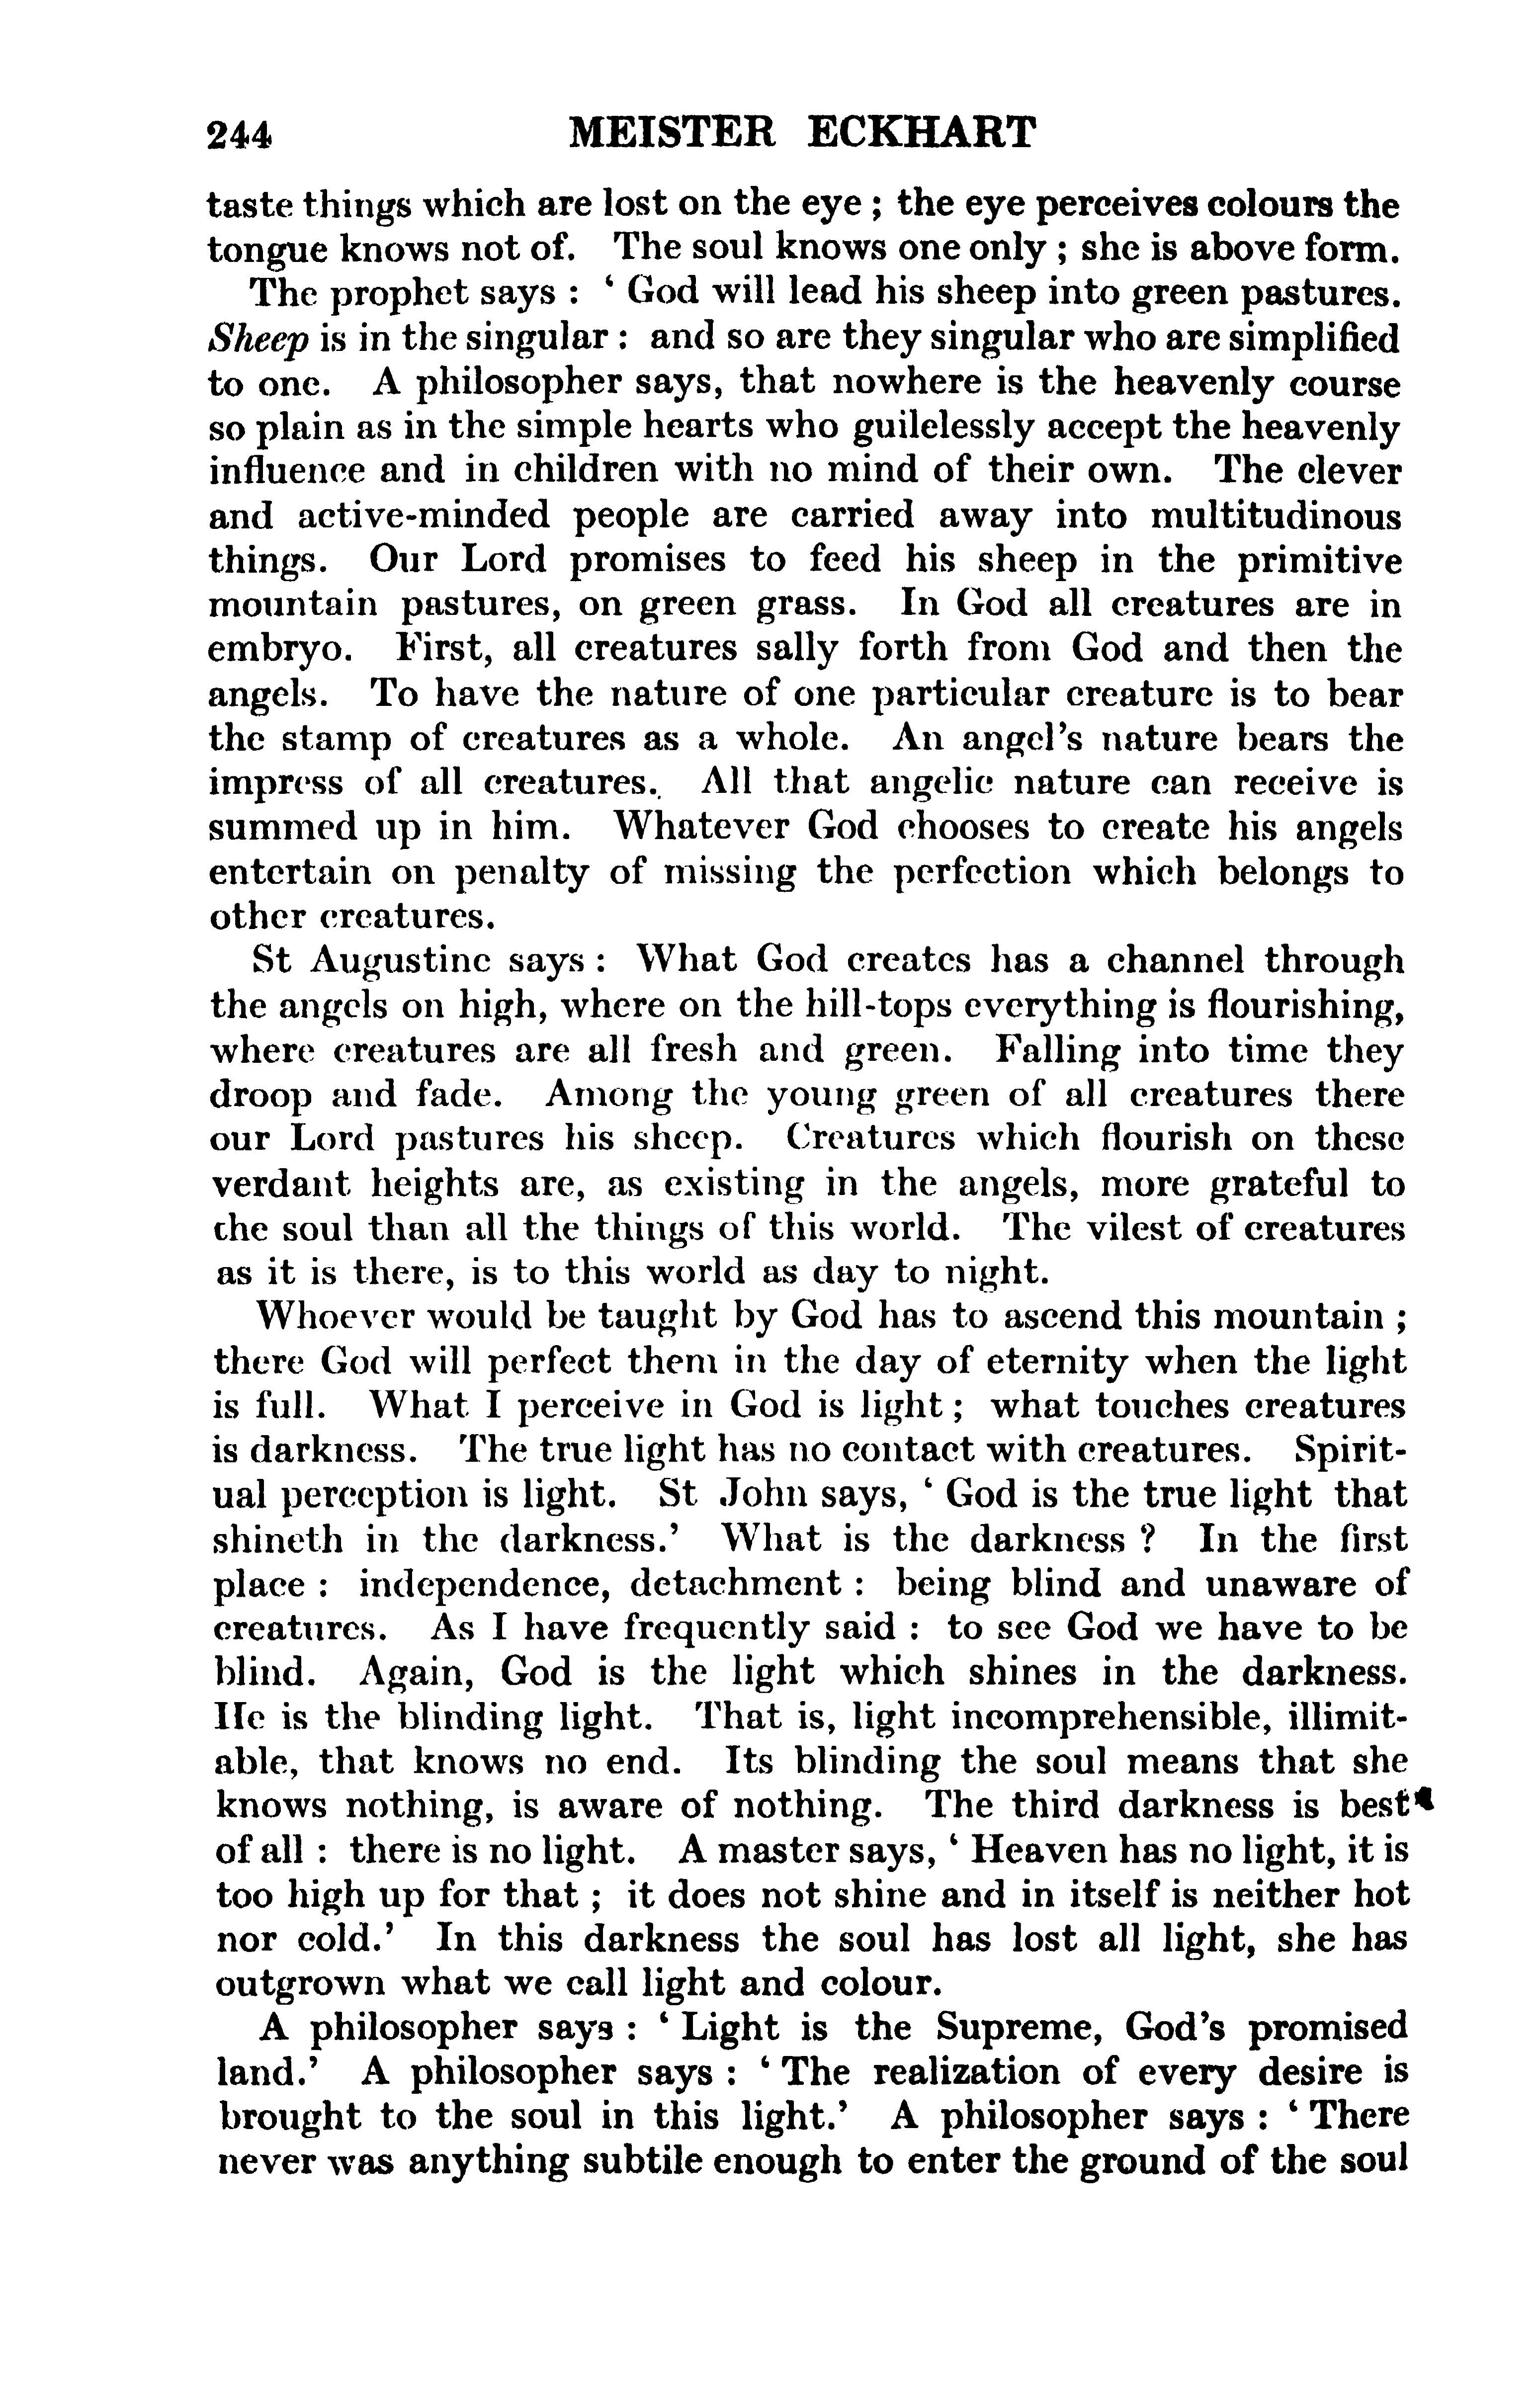 Image of page 0268